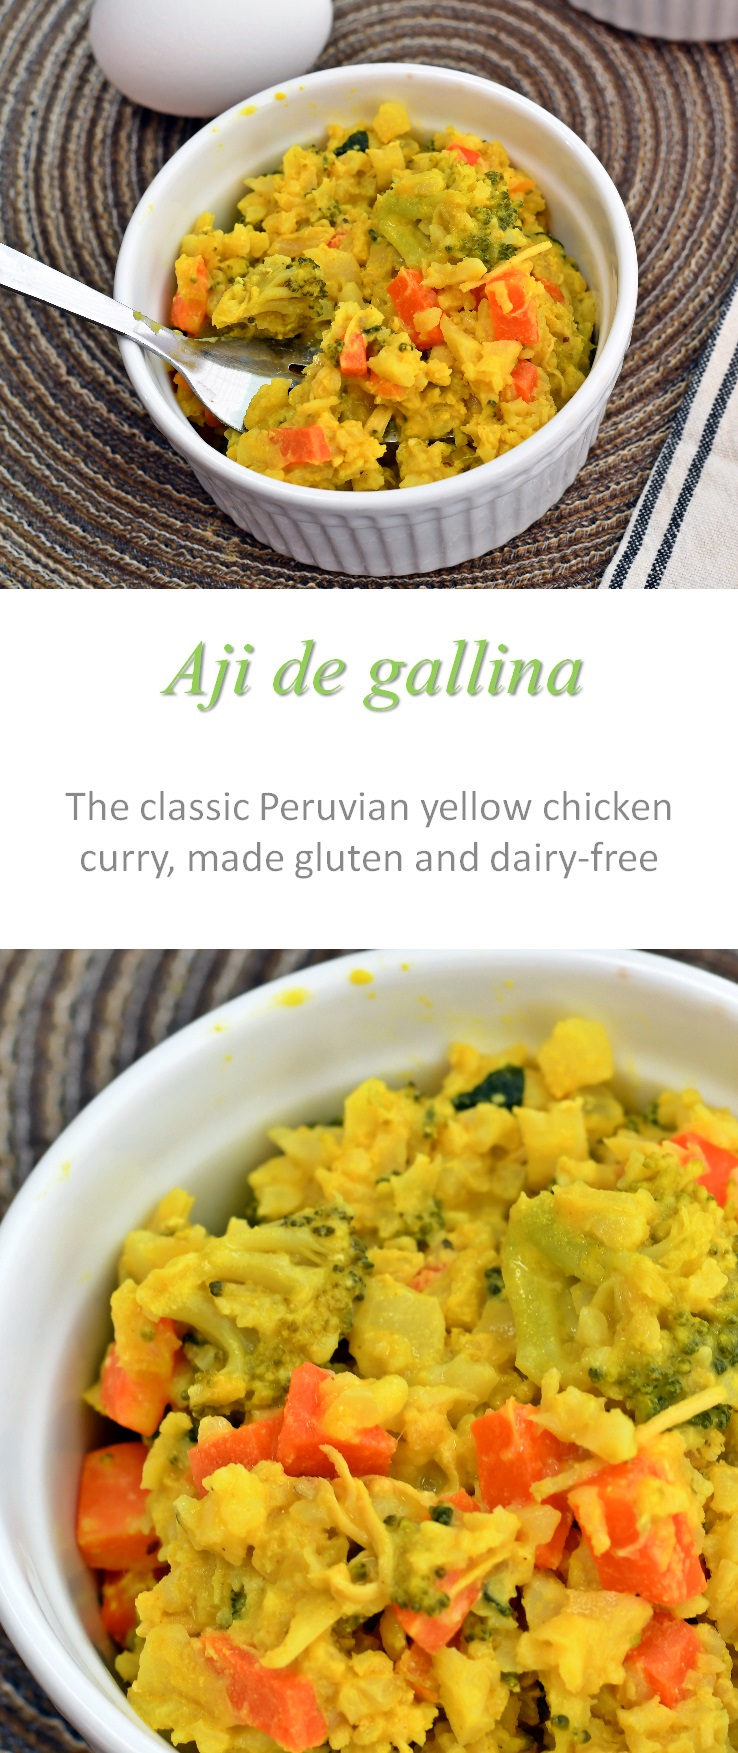 The typical Peruvian aji de gallina made gluten and dairy-free - and oh so yummy and hearty! #peruvian